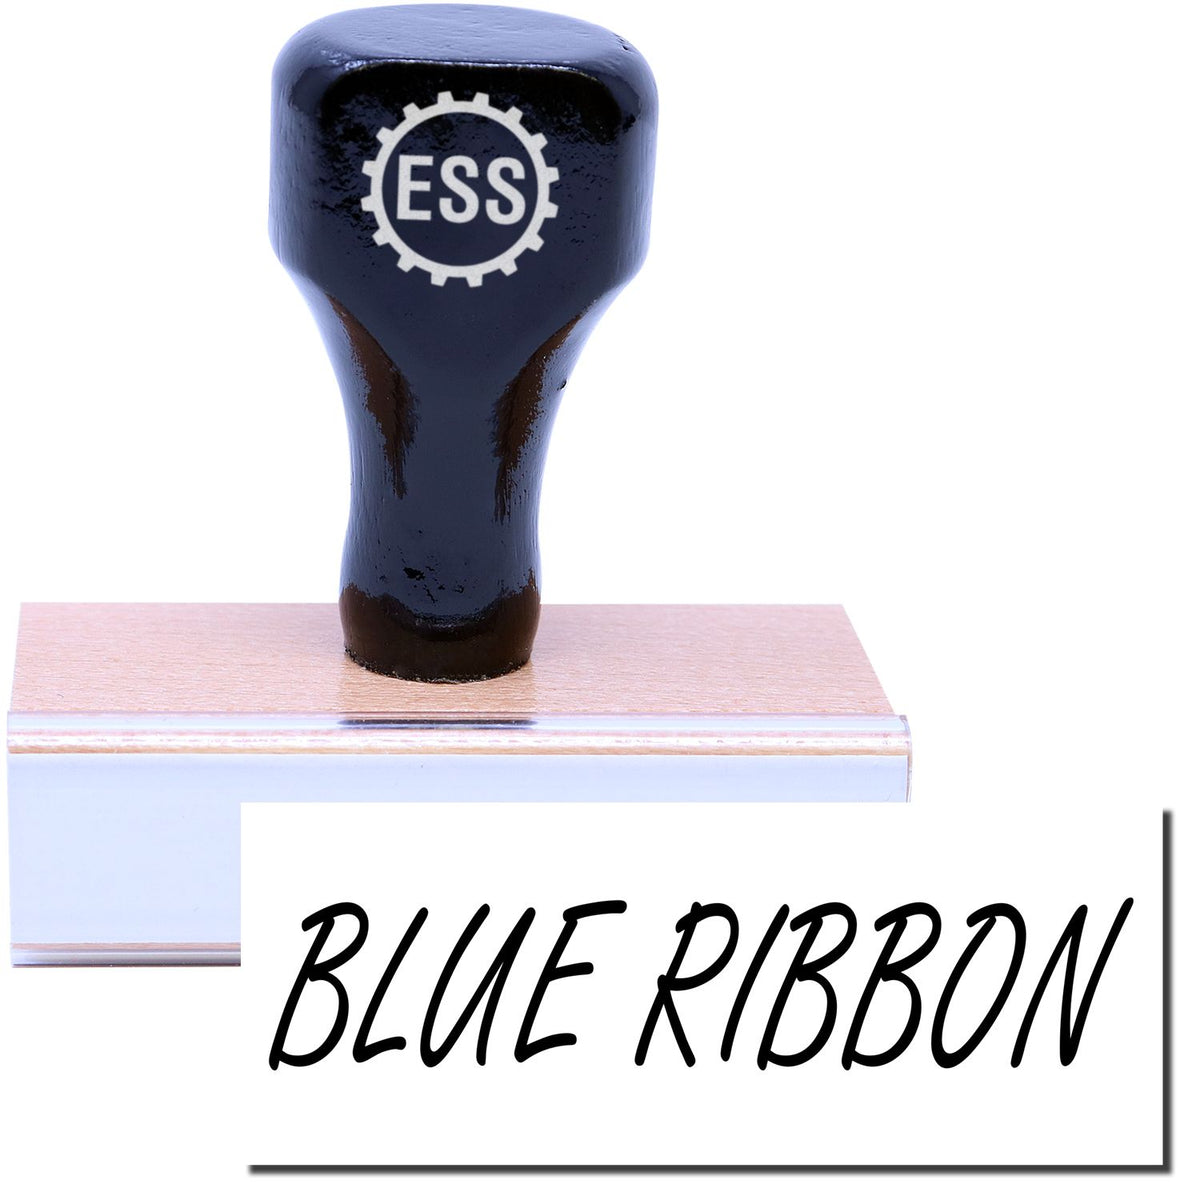 A stock office rubber stamp with a stamped image showing how the text &quot;BLUE RIBBON&quot; is displayed after stamping.